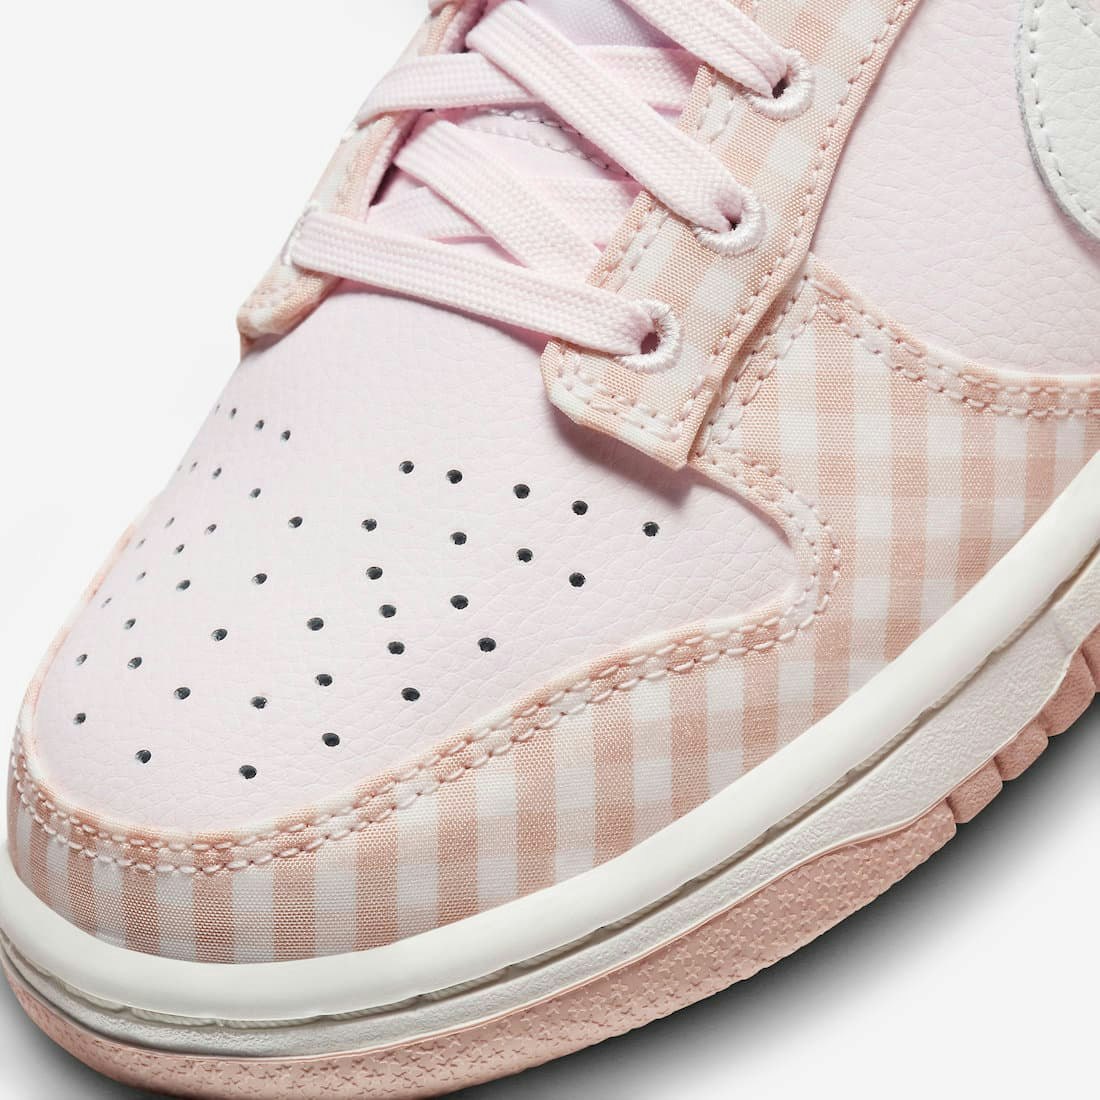 Nike Dunk Low "Pink Gingham" WMNS